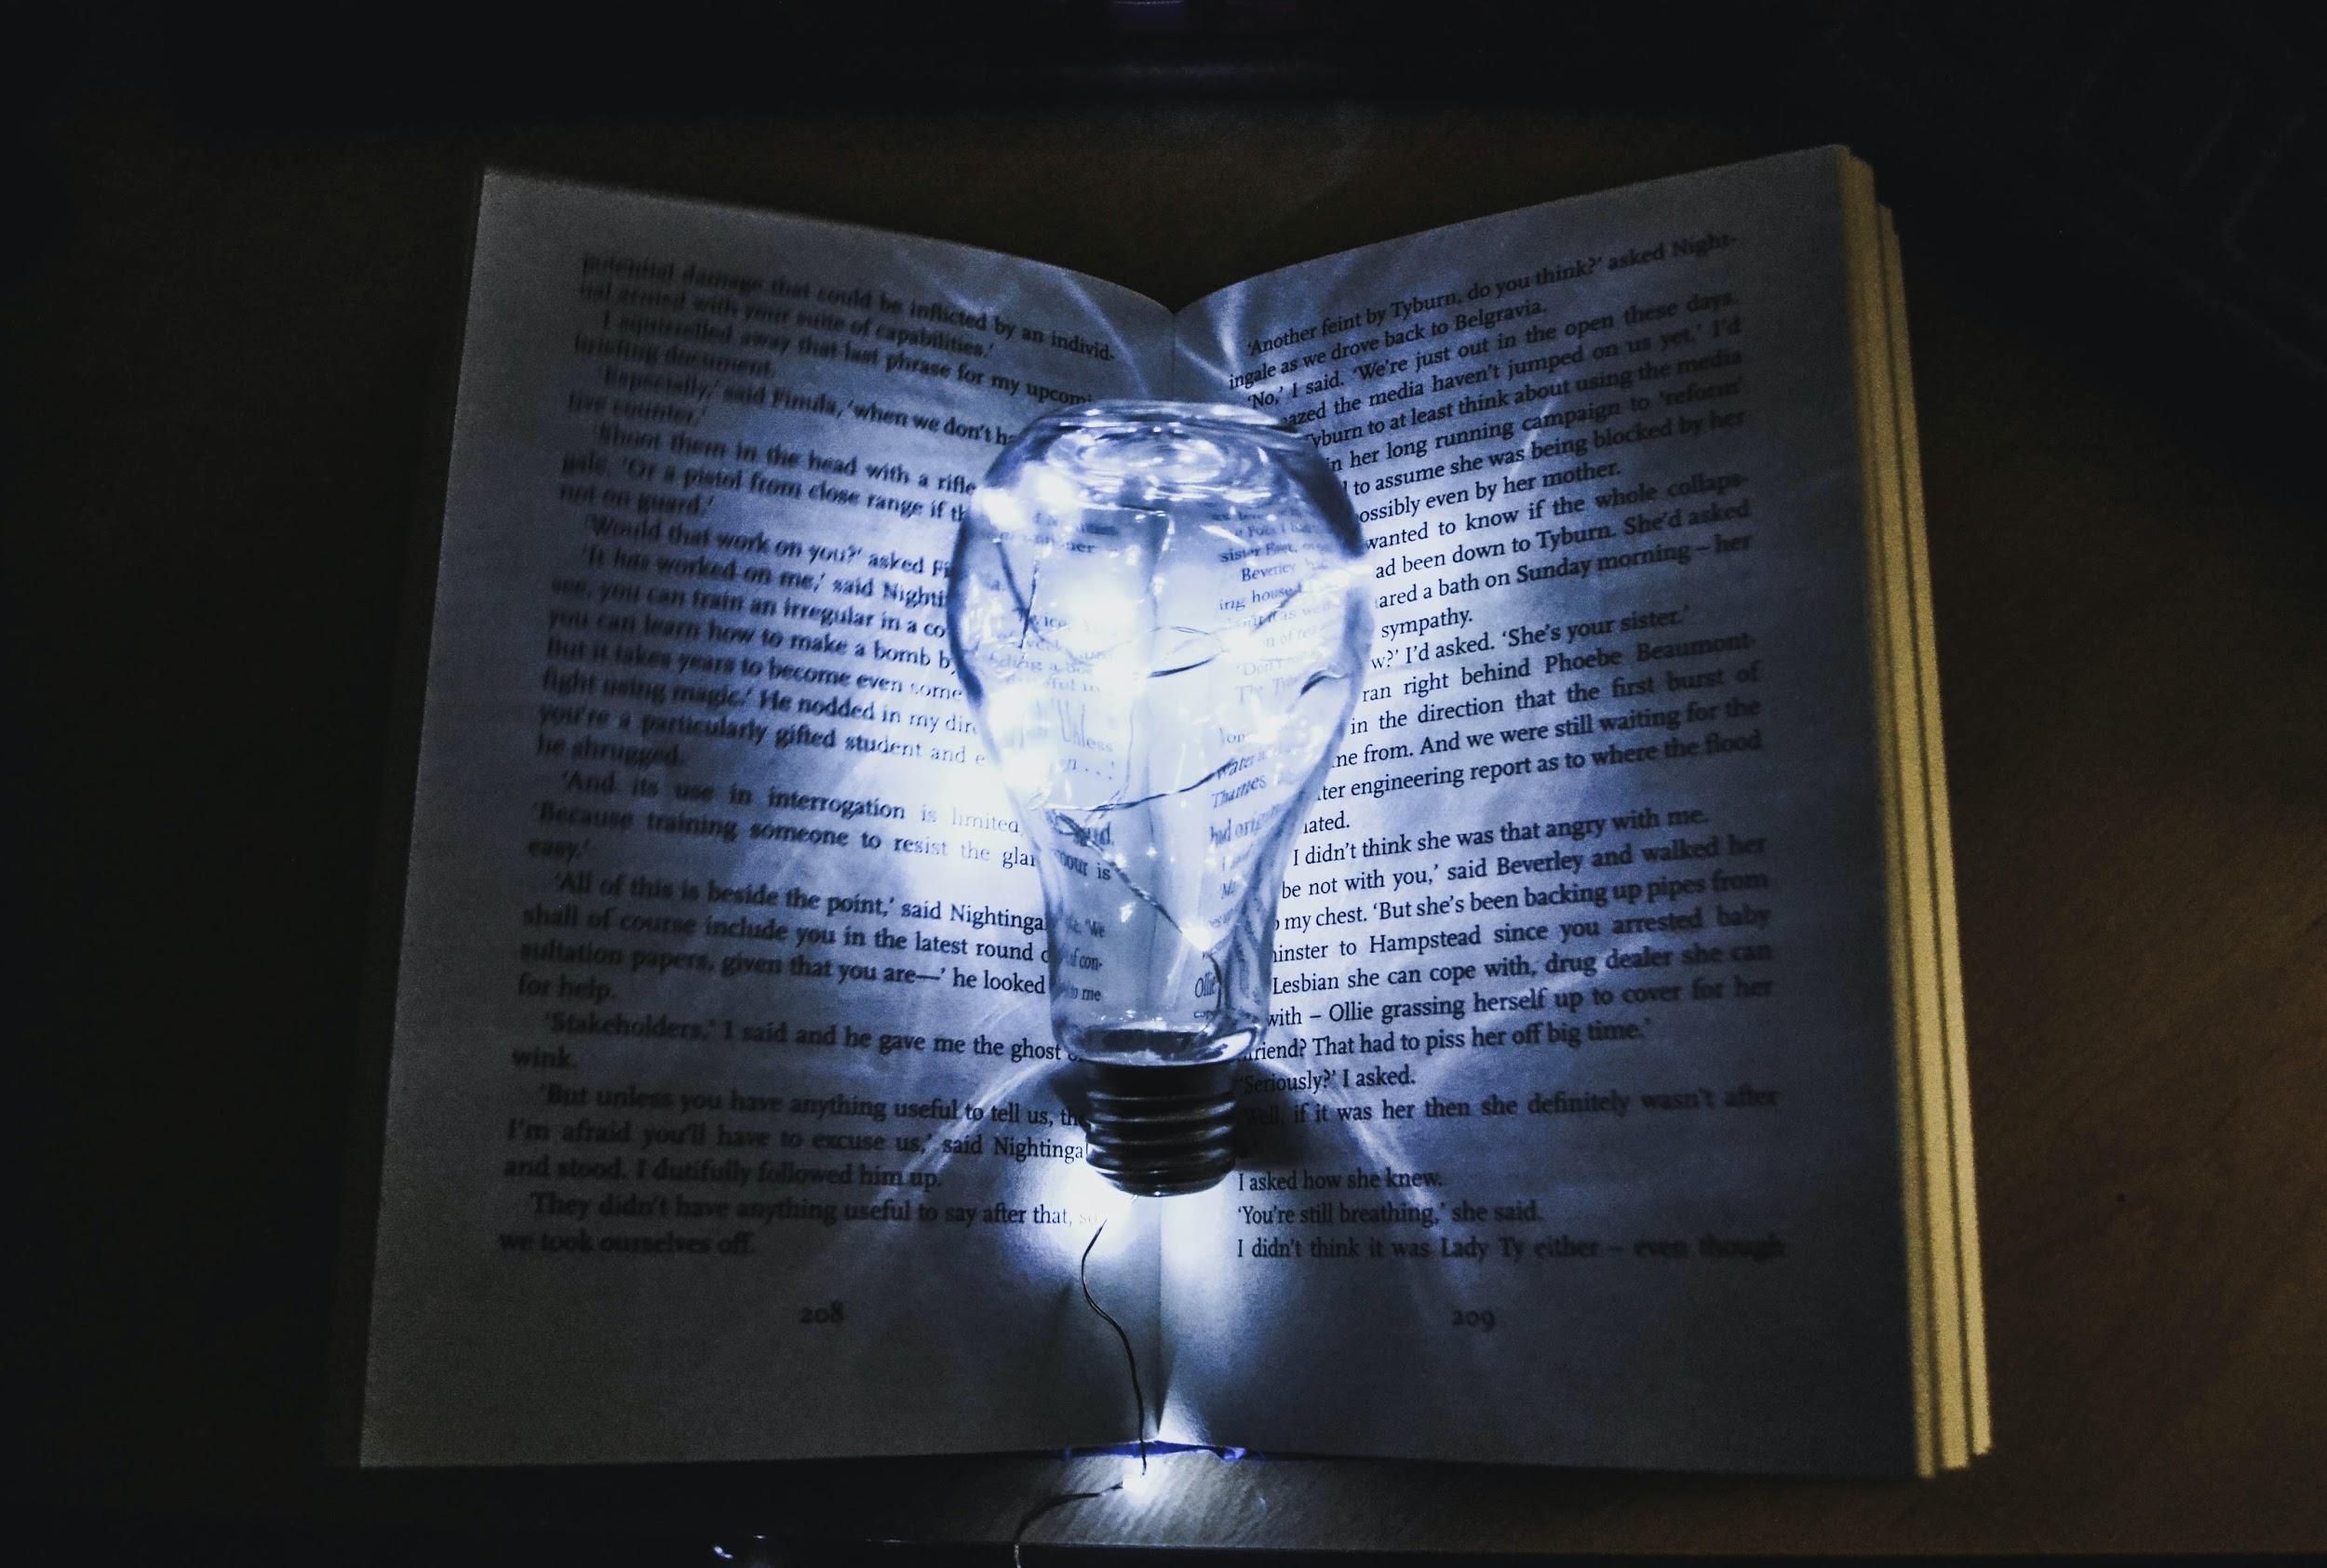 Light bulb in front of a book in a dark room